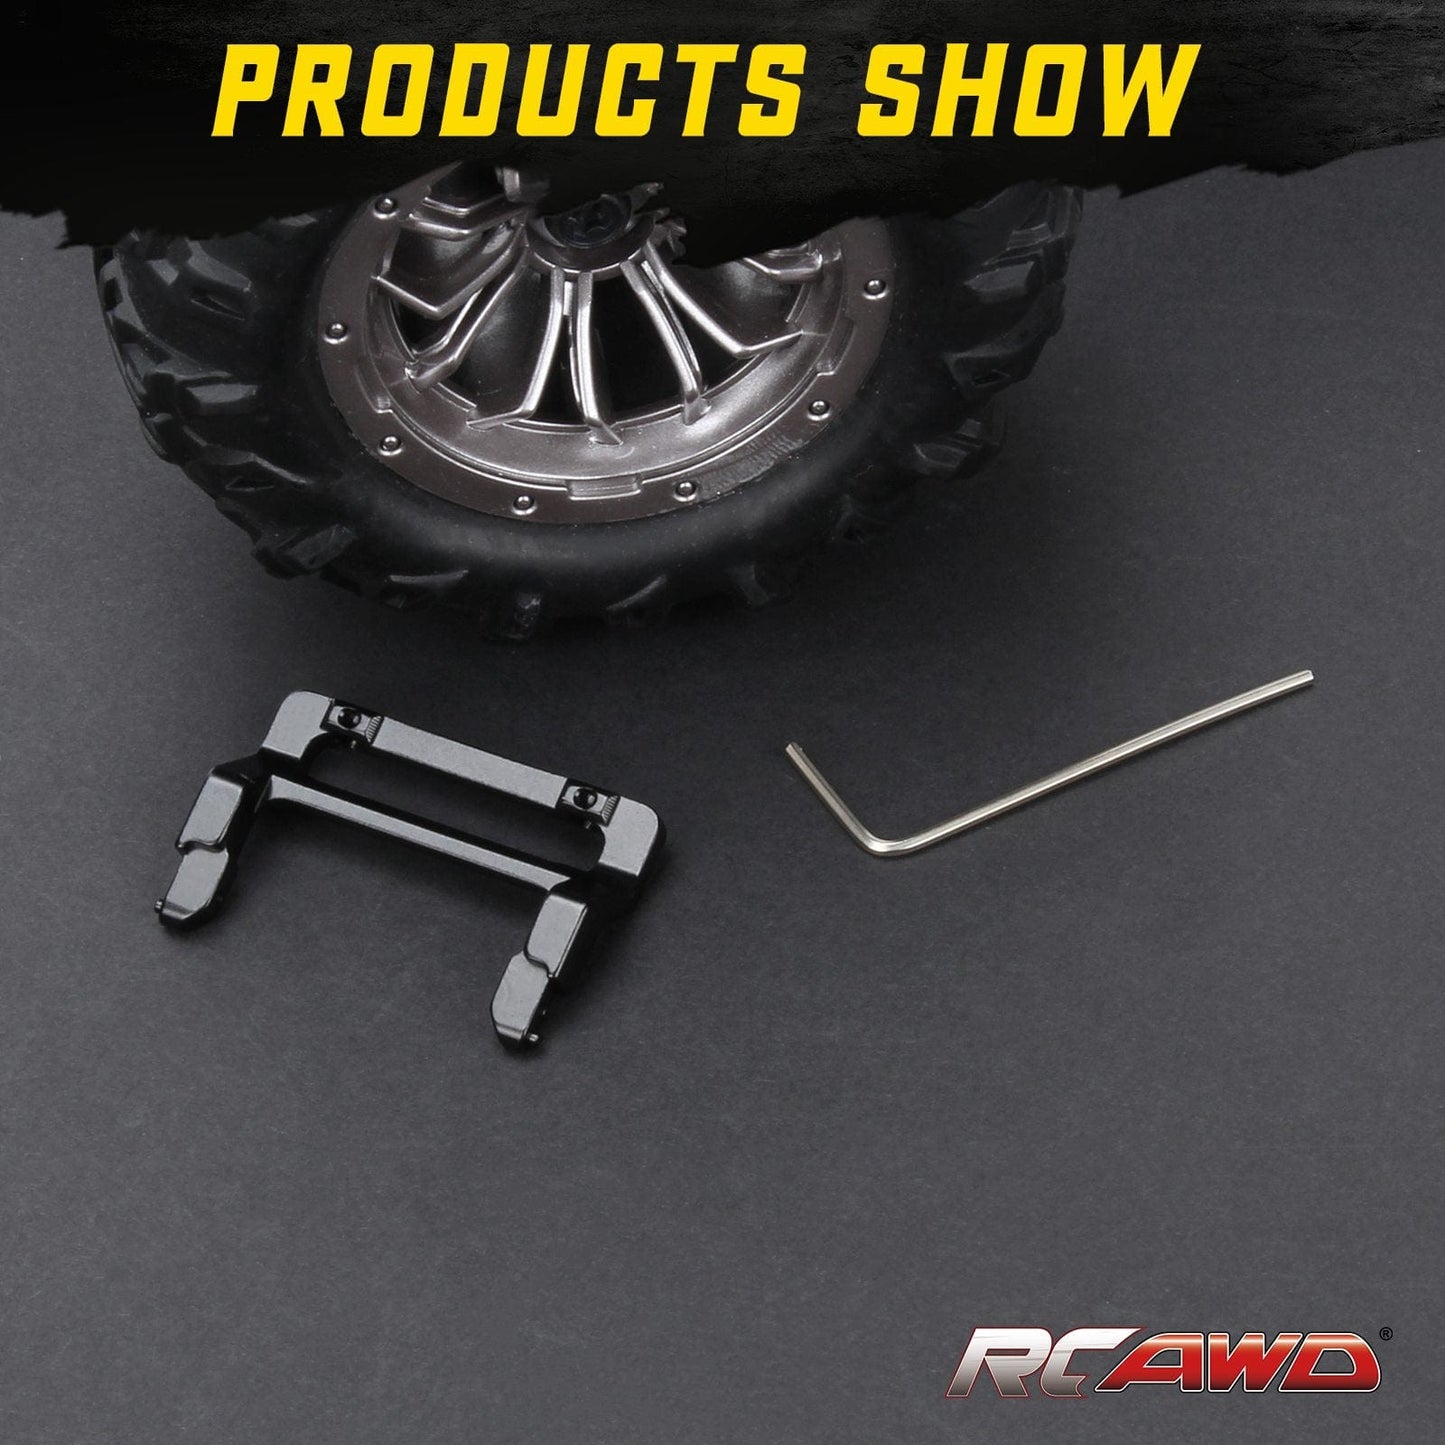 RCAWD RCAWD 1/24 Axial SCX24 Upgrades Aluminum alloy front bumper mount SCX2451